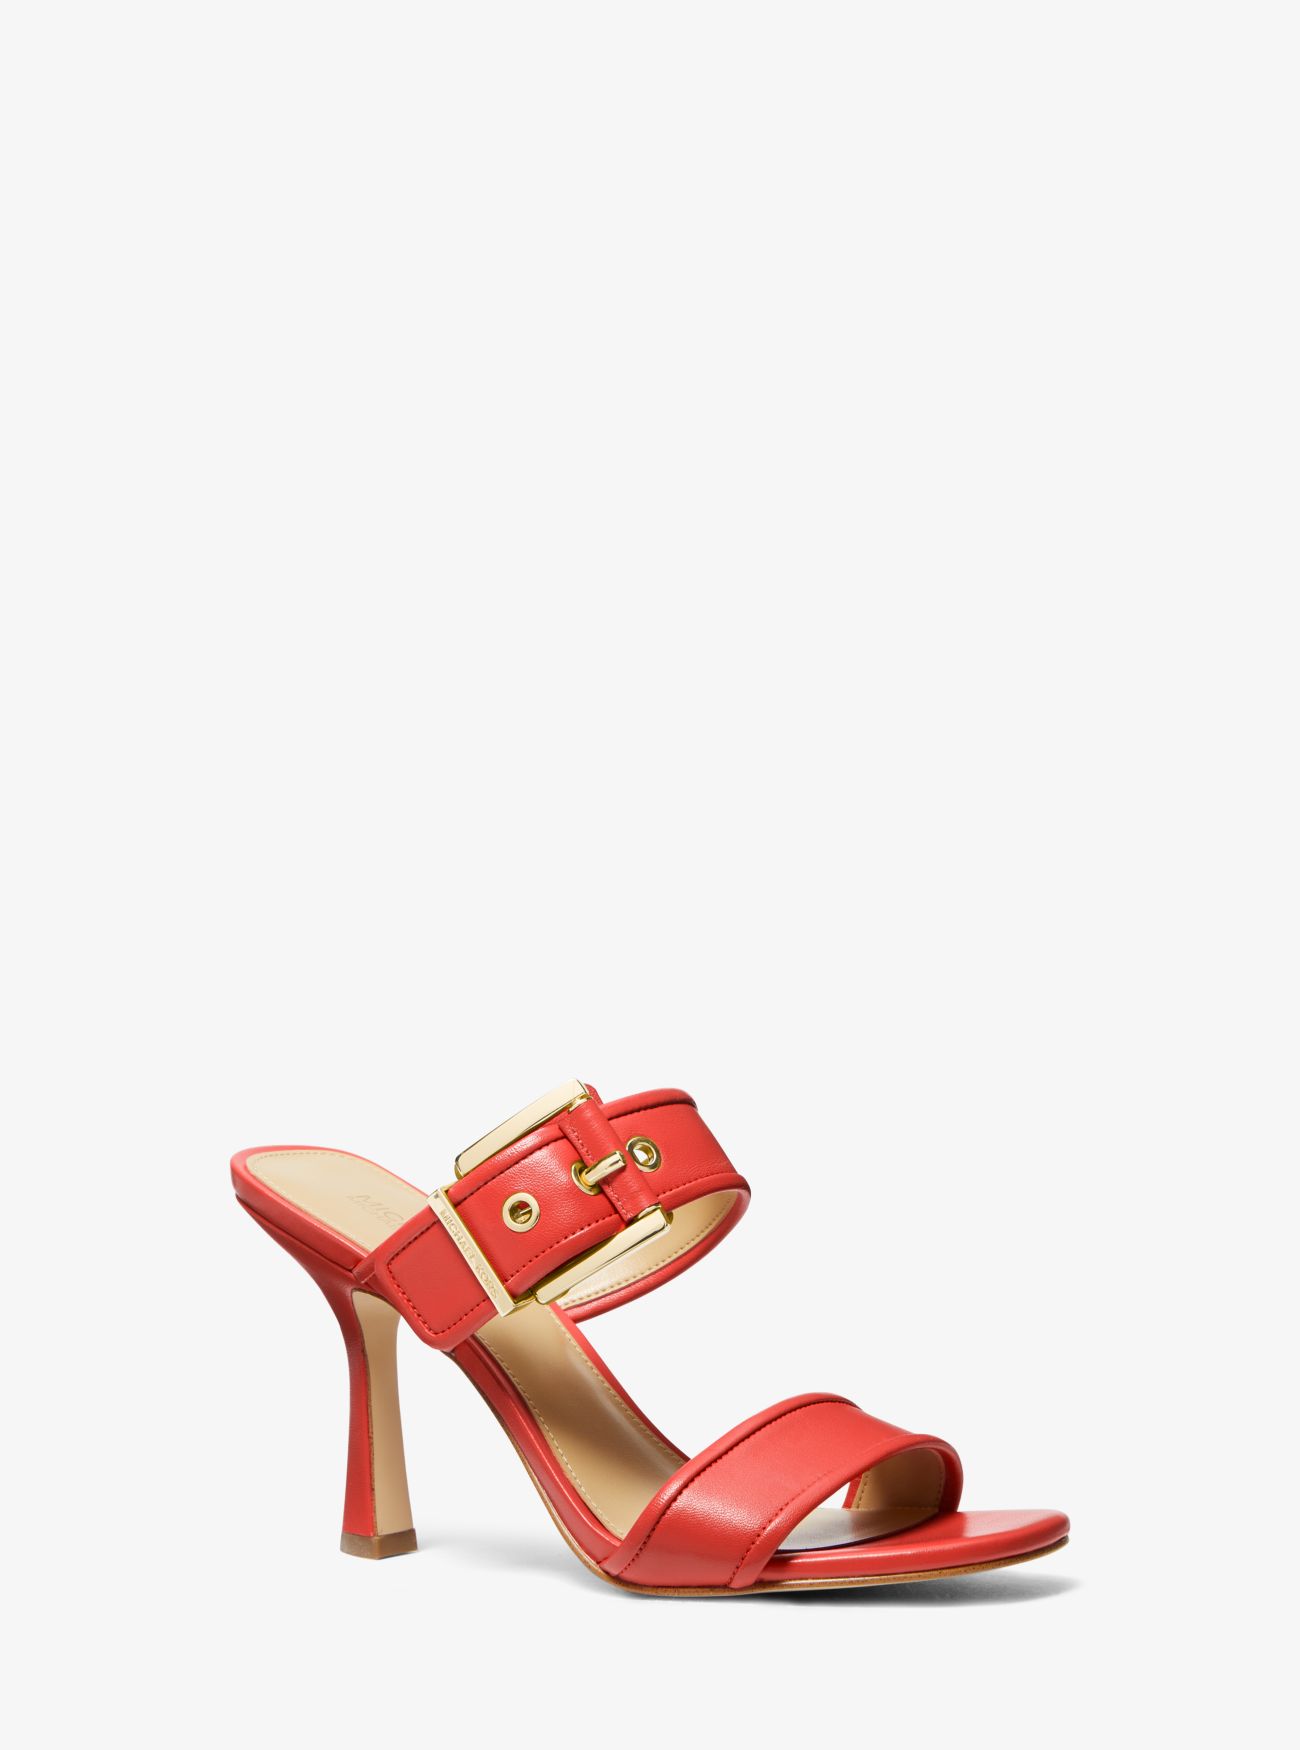 MK Colby Leather Sandal - Spiced Coral - Michael Kors